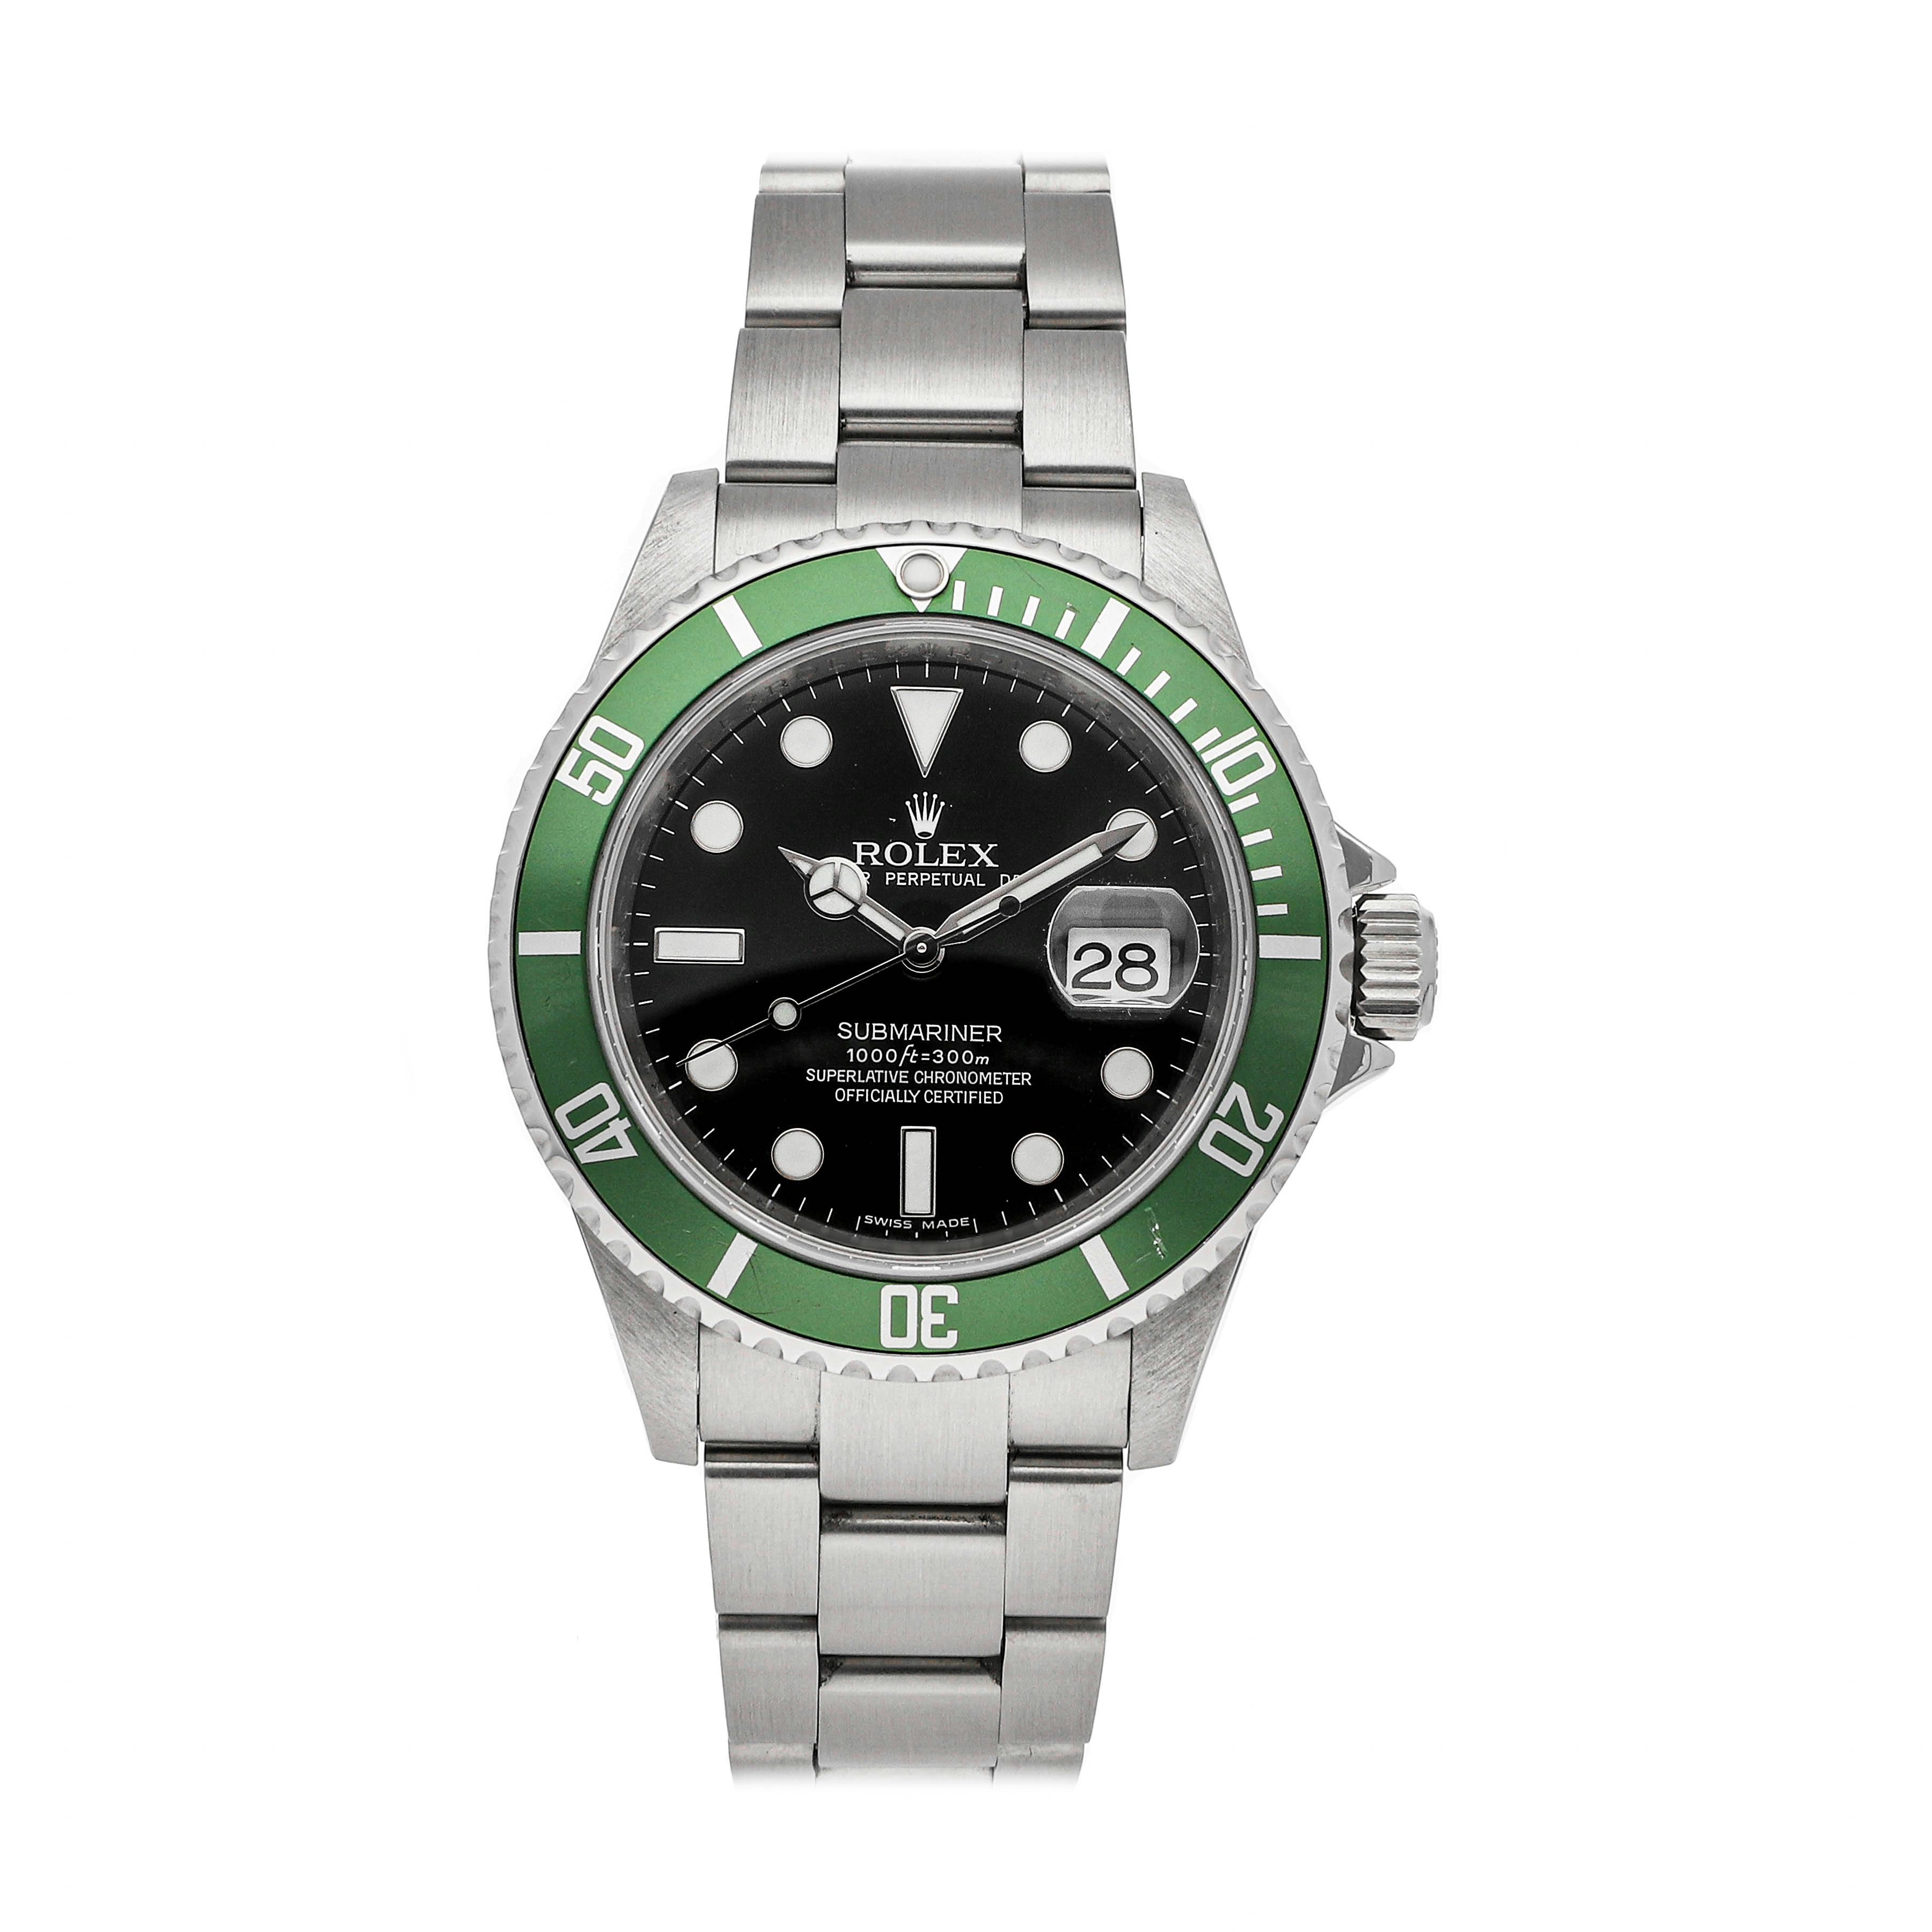 Guaranteed Pre-Owned Rolex Watches for 